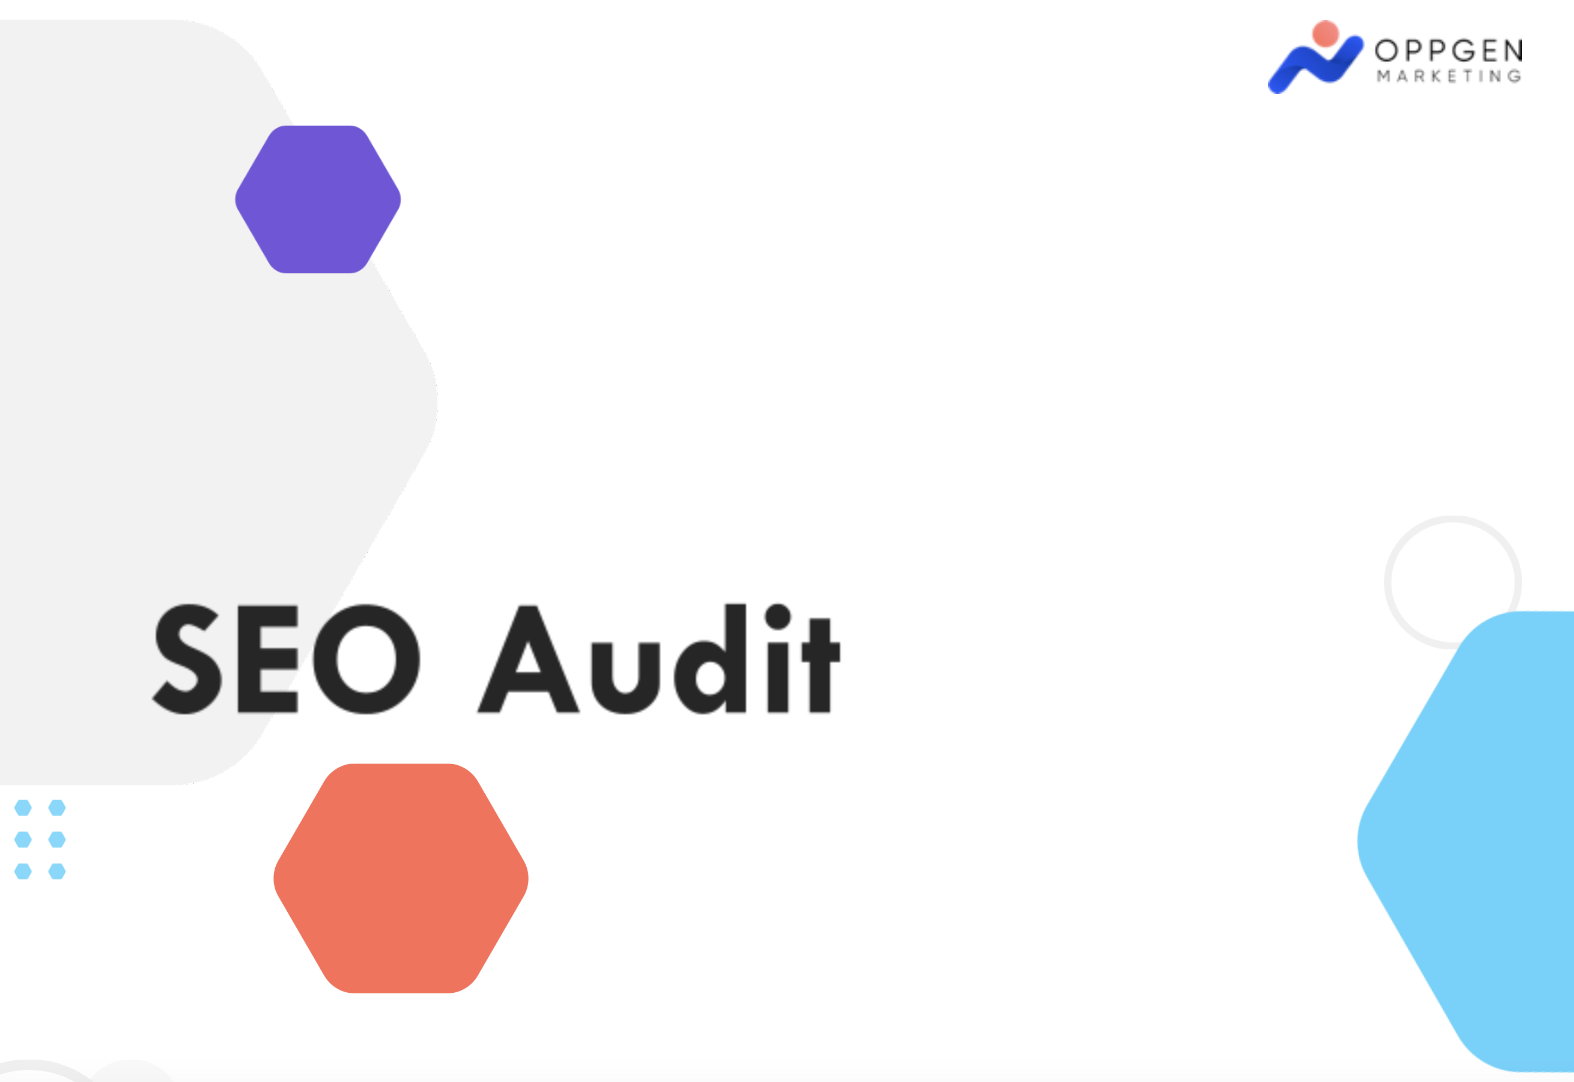 SEO Audit Service: How to Find Your Biggest SEO Issues